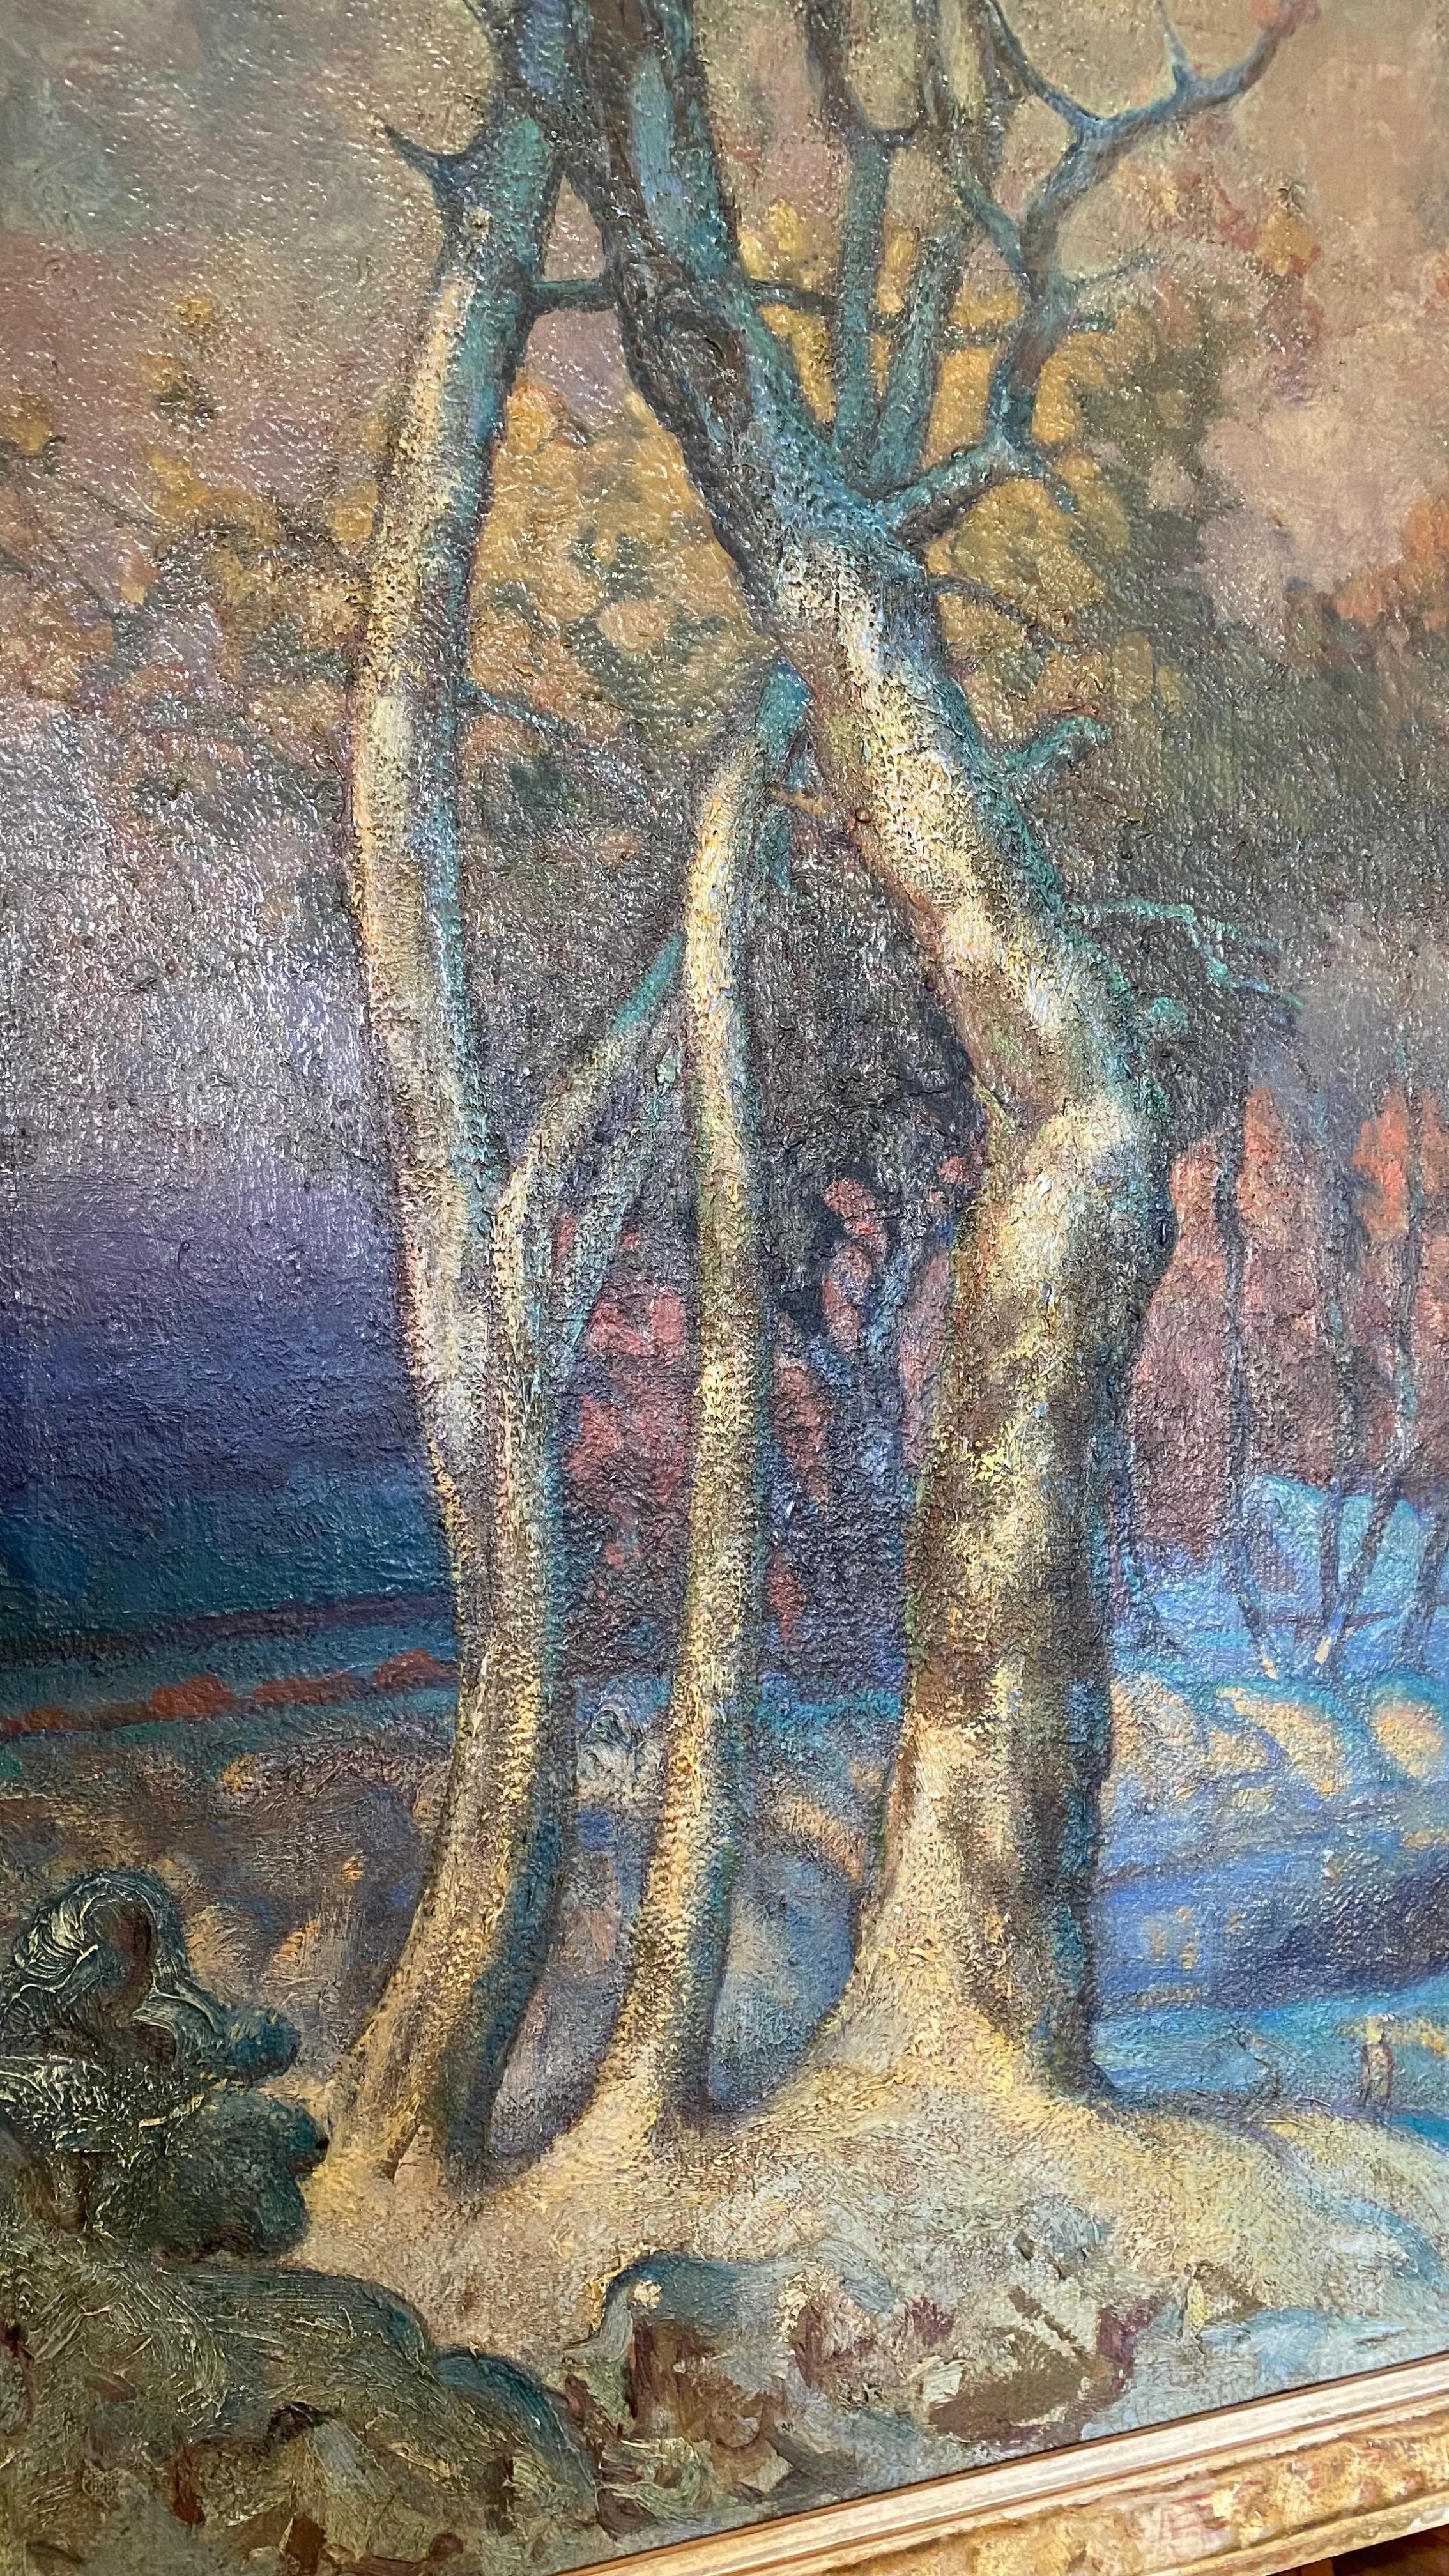 Hand-Painted Large Landscape Painting by California San Francisco Artist Peter Ilyin For Sale